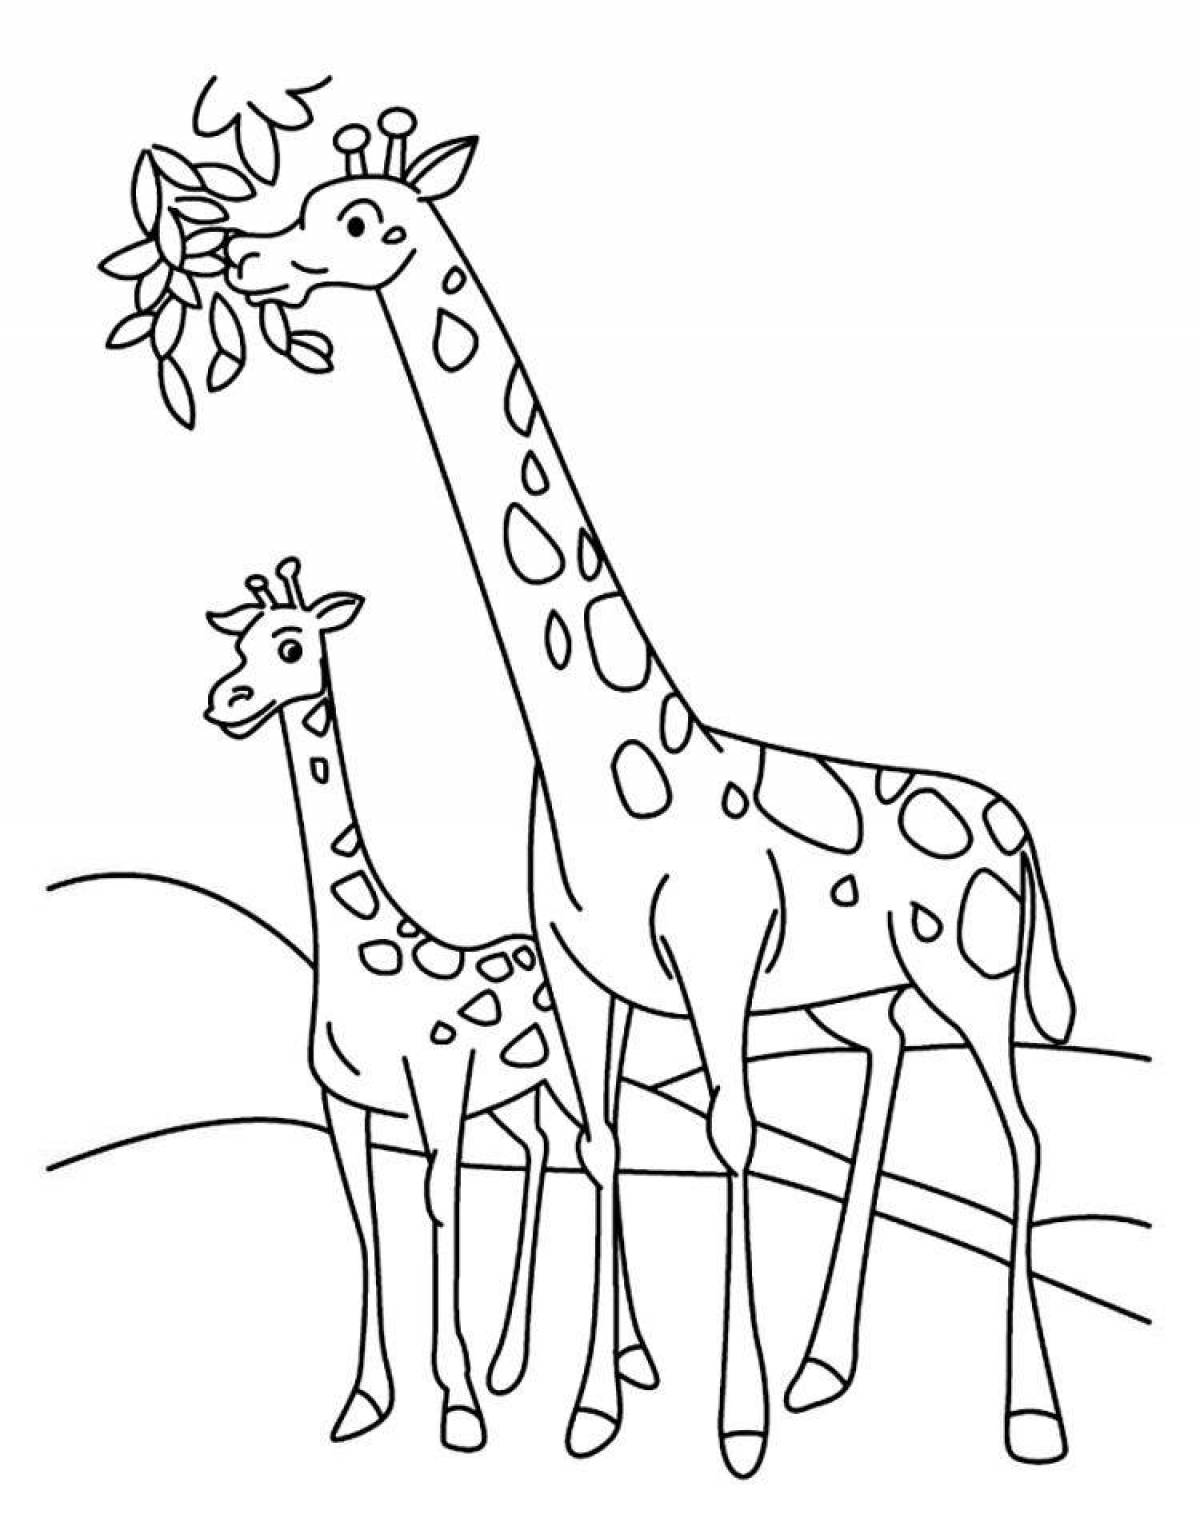 Funny giraffe coloring for children 3-4 years old